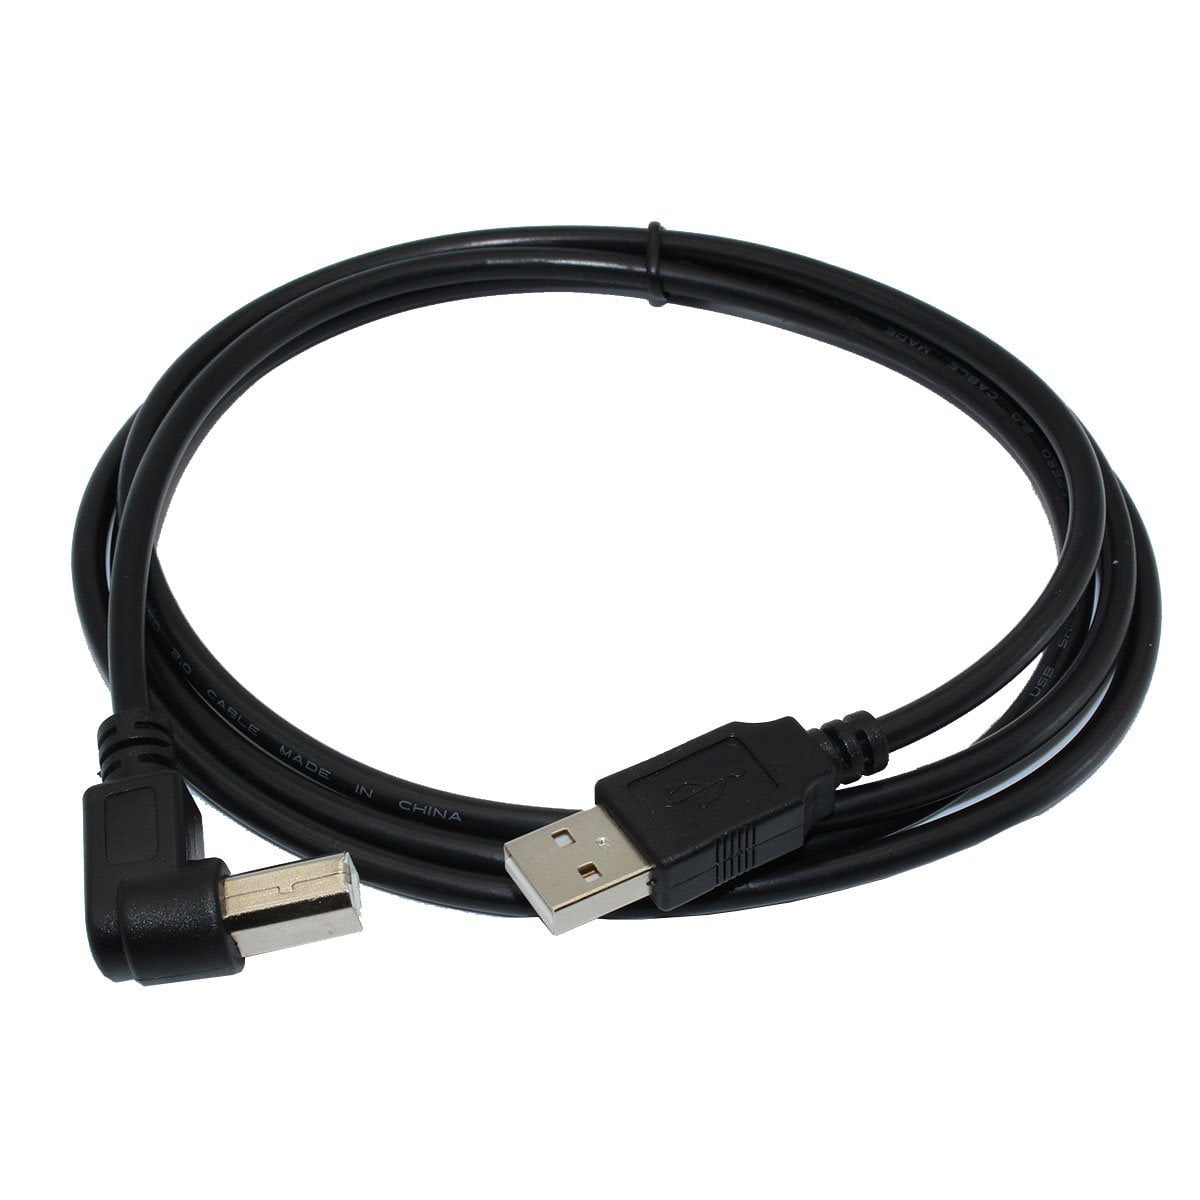 BCFPrinter2123 10 Feet, Black ReadyPlug USB Cable Compatible with Brother Wireless All-in-One Printer MFC-J475DW 